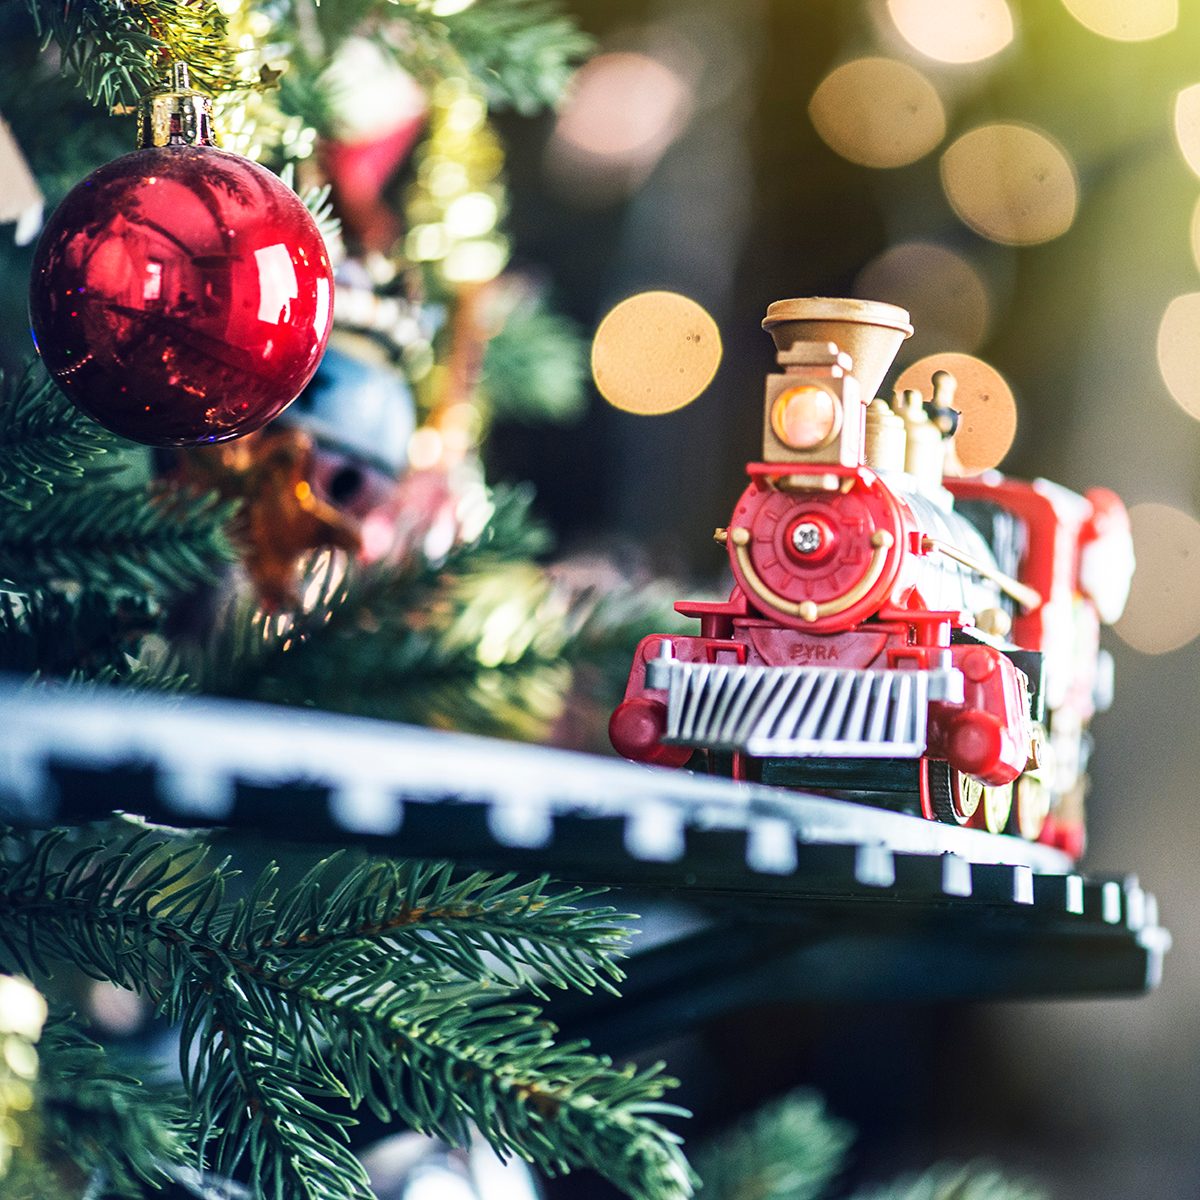 https://www.tasteofhome.com/wp-content/uploads/2020/12/christmas-tree-train-GettyImages-1038039630.jpg?fit=700%2C700